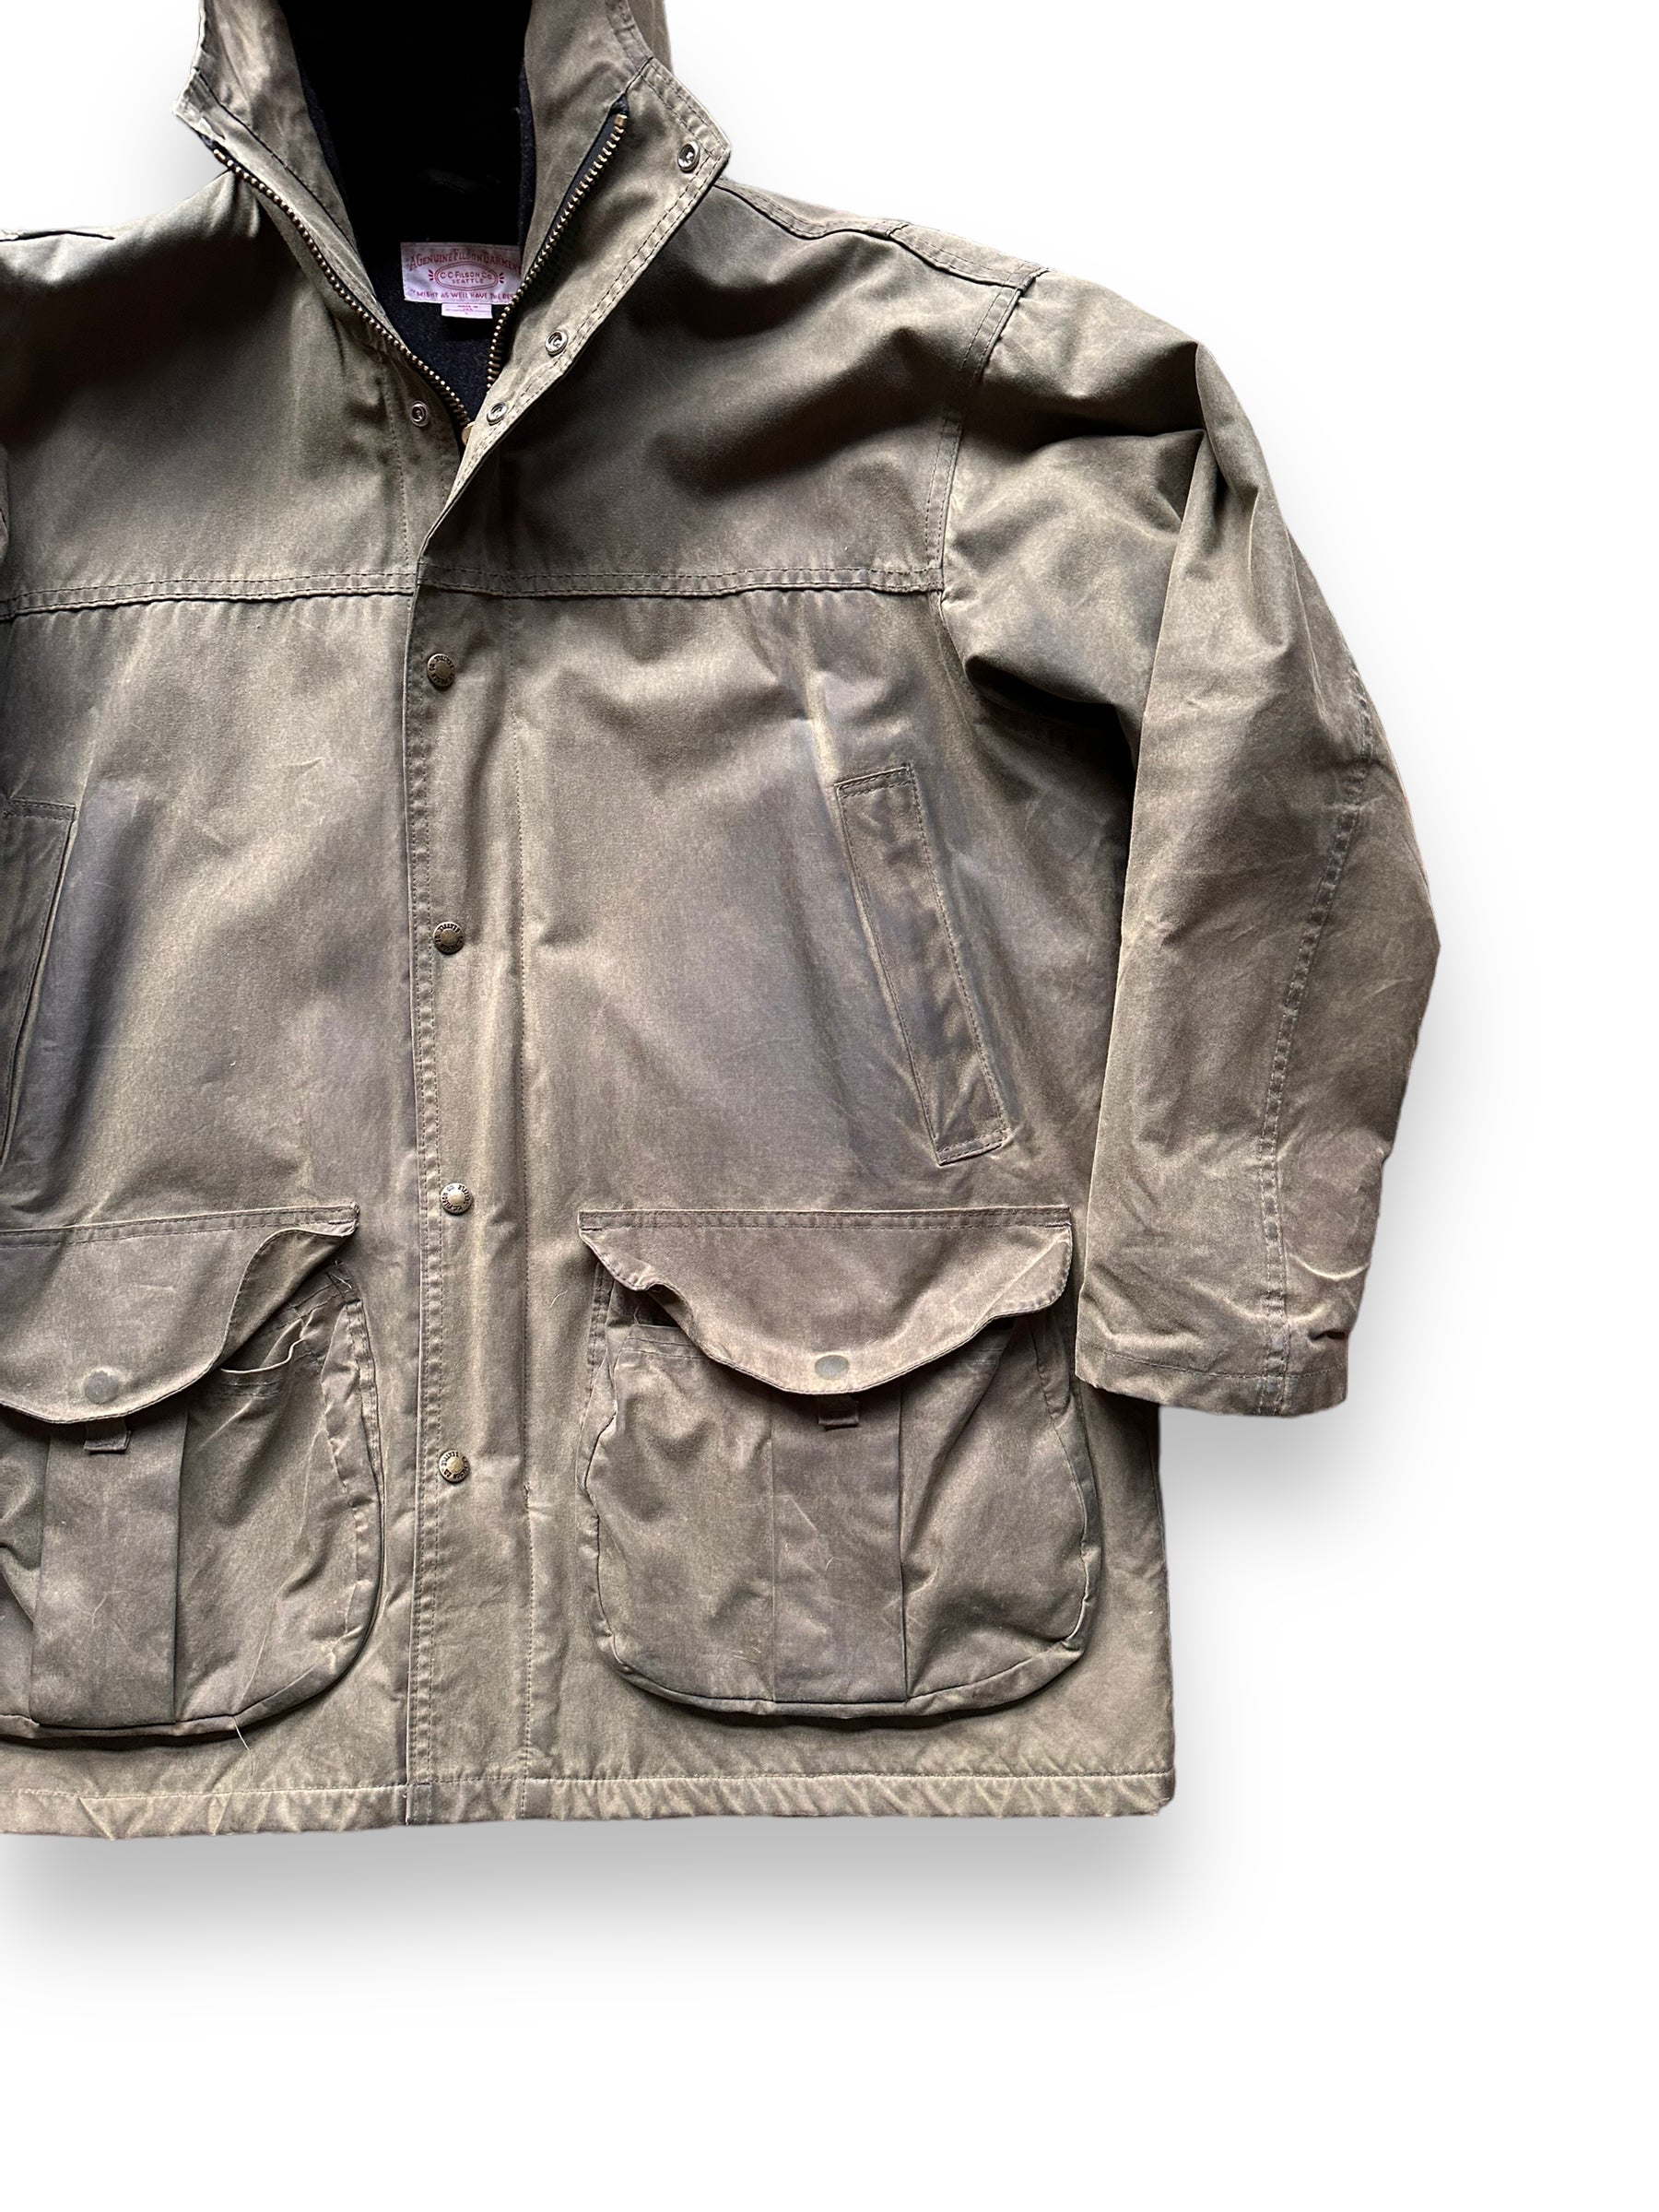 Front Left View of Filson Foothills Parka SZ L |  Filson Tin Cloth Jackets Seattle | Barn Owl Vintage Clothing Seattle